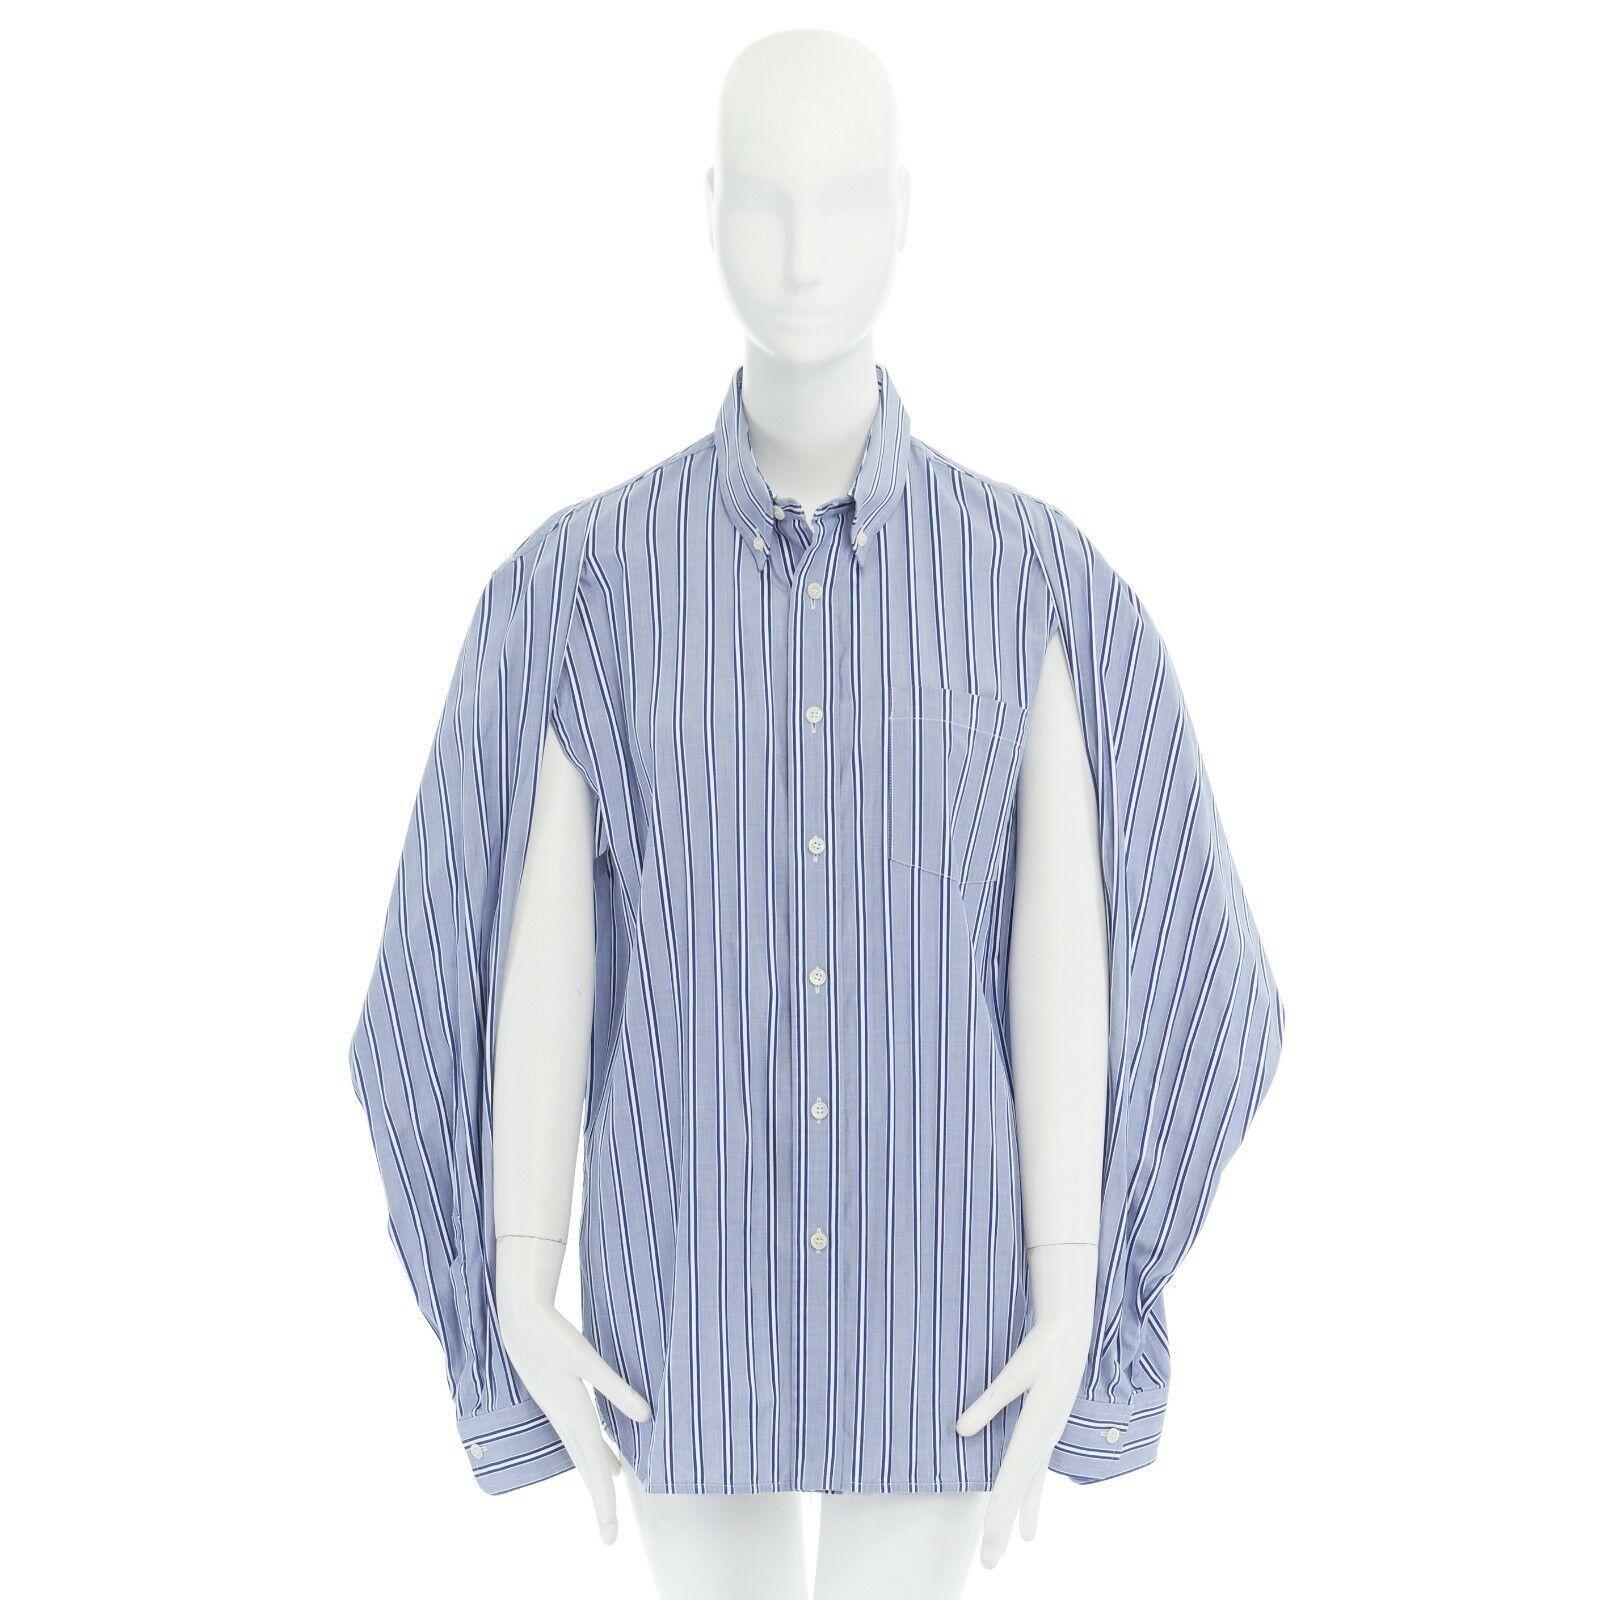 BALENCIAGA DEMNA 2016 blue striped off shoulder underarm cut out shirt FR38 M

BALENCIAGA BY DEMNA GVASALIA
FROM THE 2016 COLLECTION
Cotton. 
Blue verticle stripe. 
Spread collar. 
Button front closure. 
Long sleeves. 
Cut out hole at underarm.